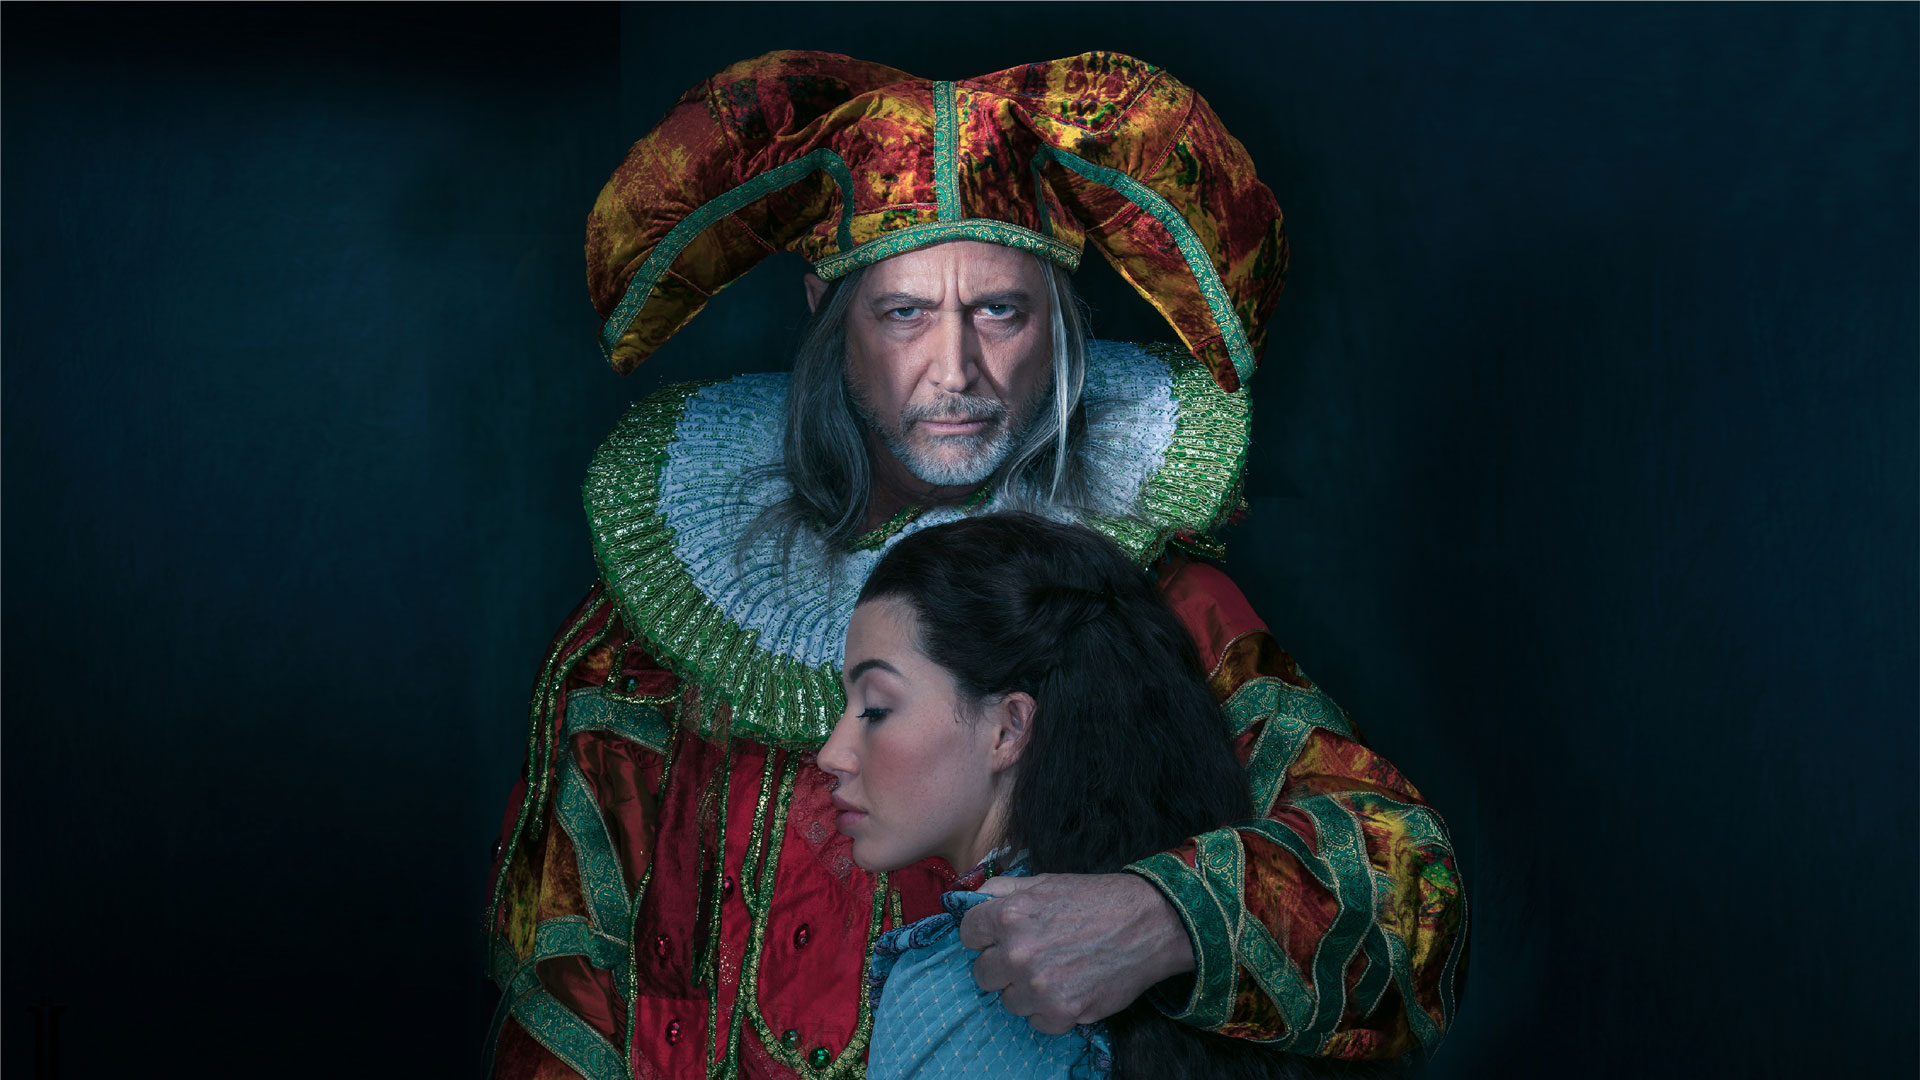 Individual_ImageOnly_Rigoletto_1920x1080.jpg